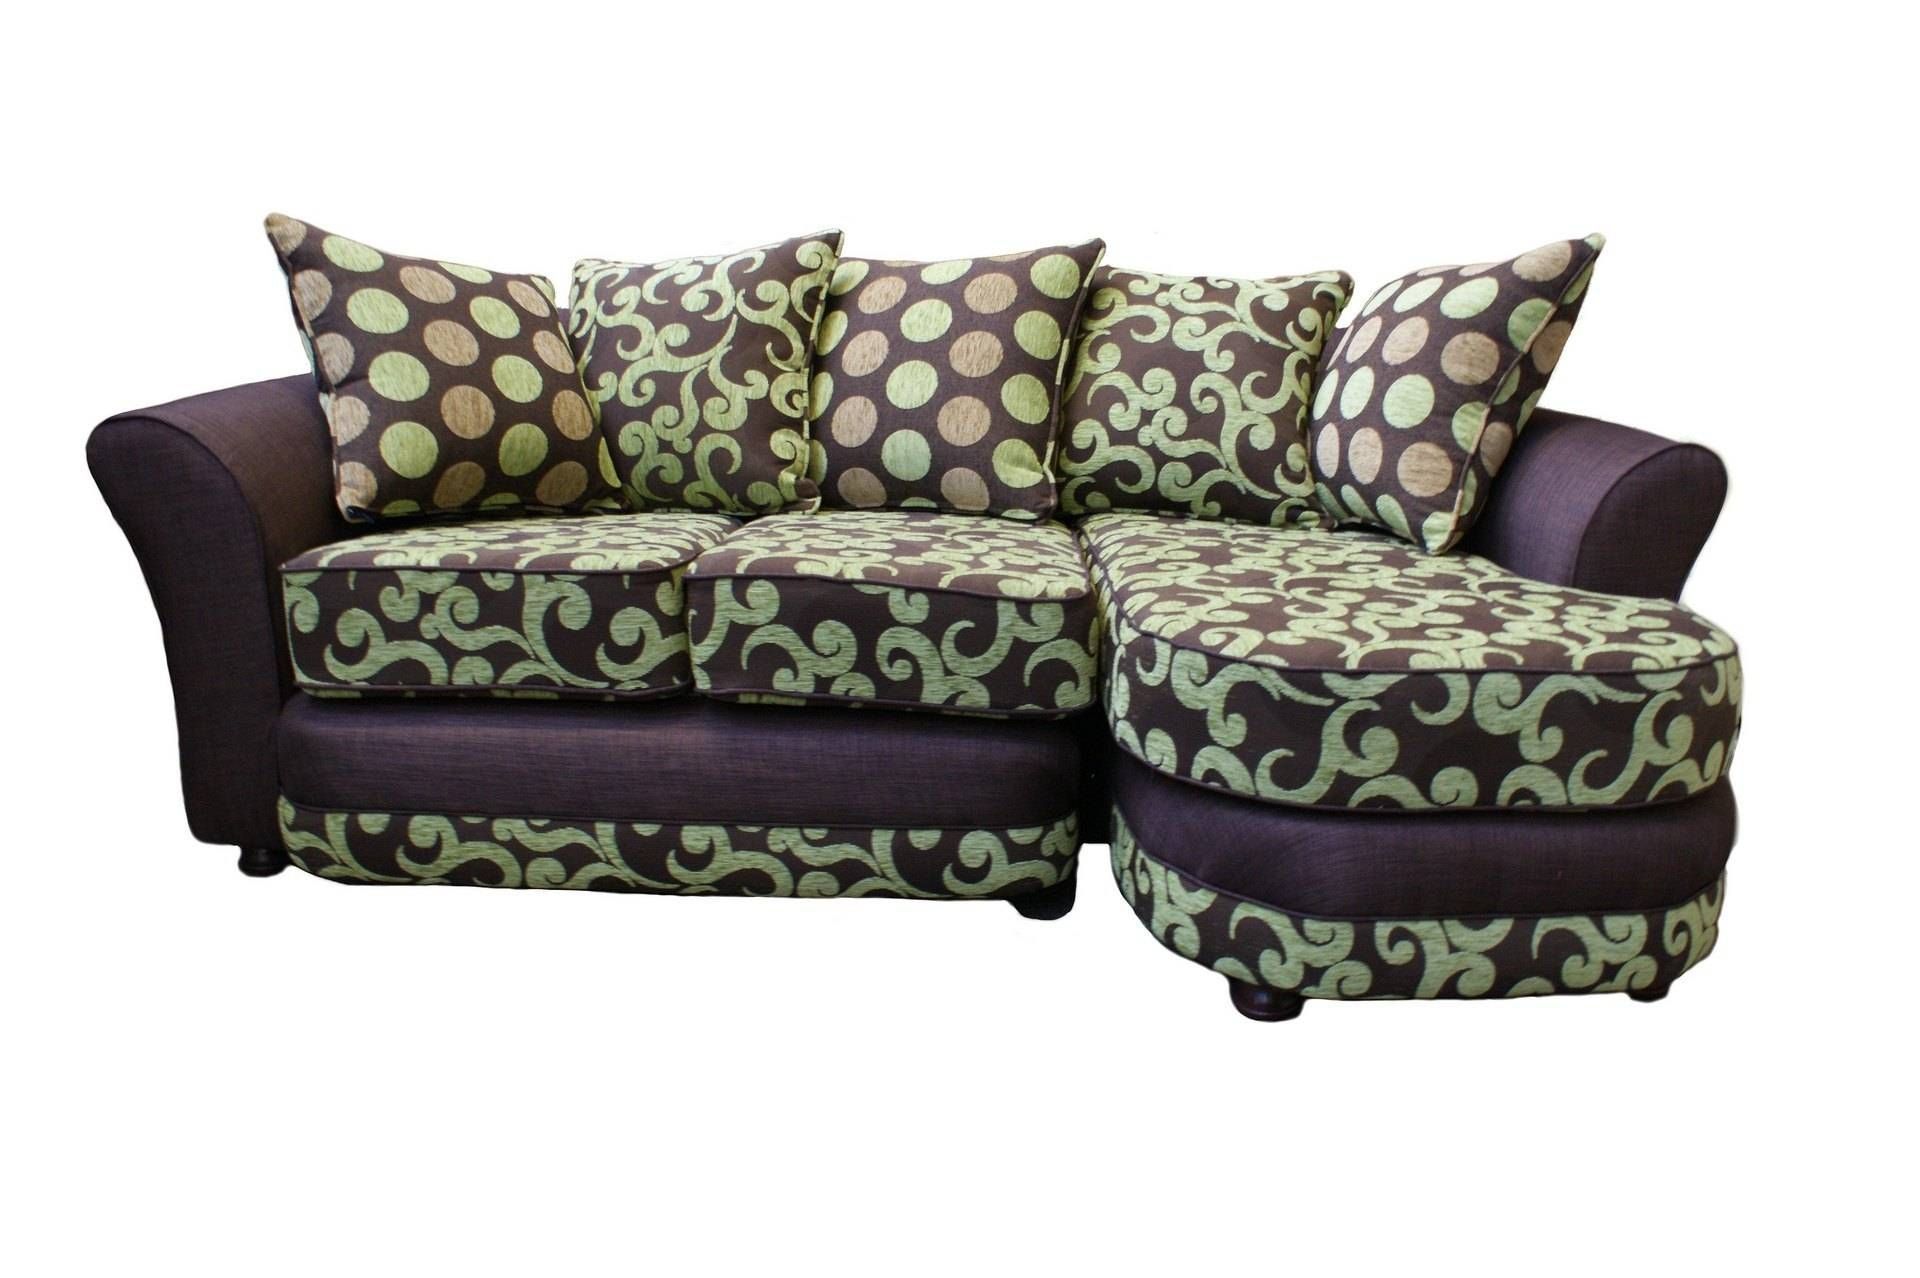 Living Room Sectional Sofas For Small Spaces Uk Best With Regard To Sectional Sofas For Small Spaces With Recliners 